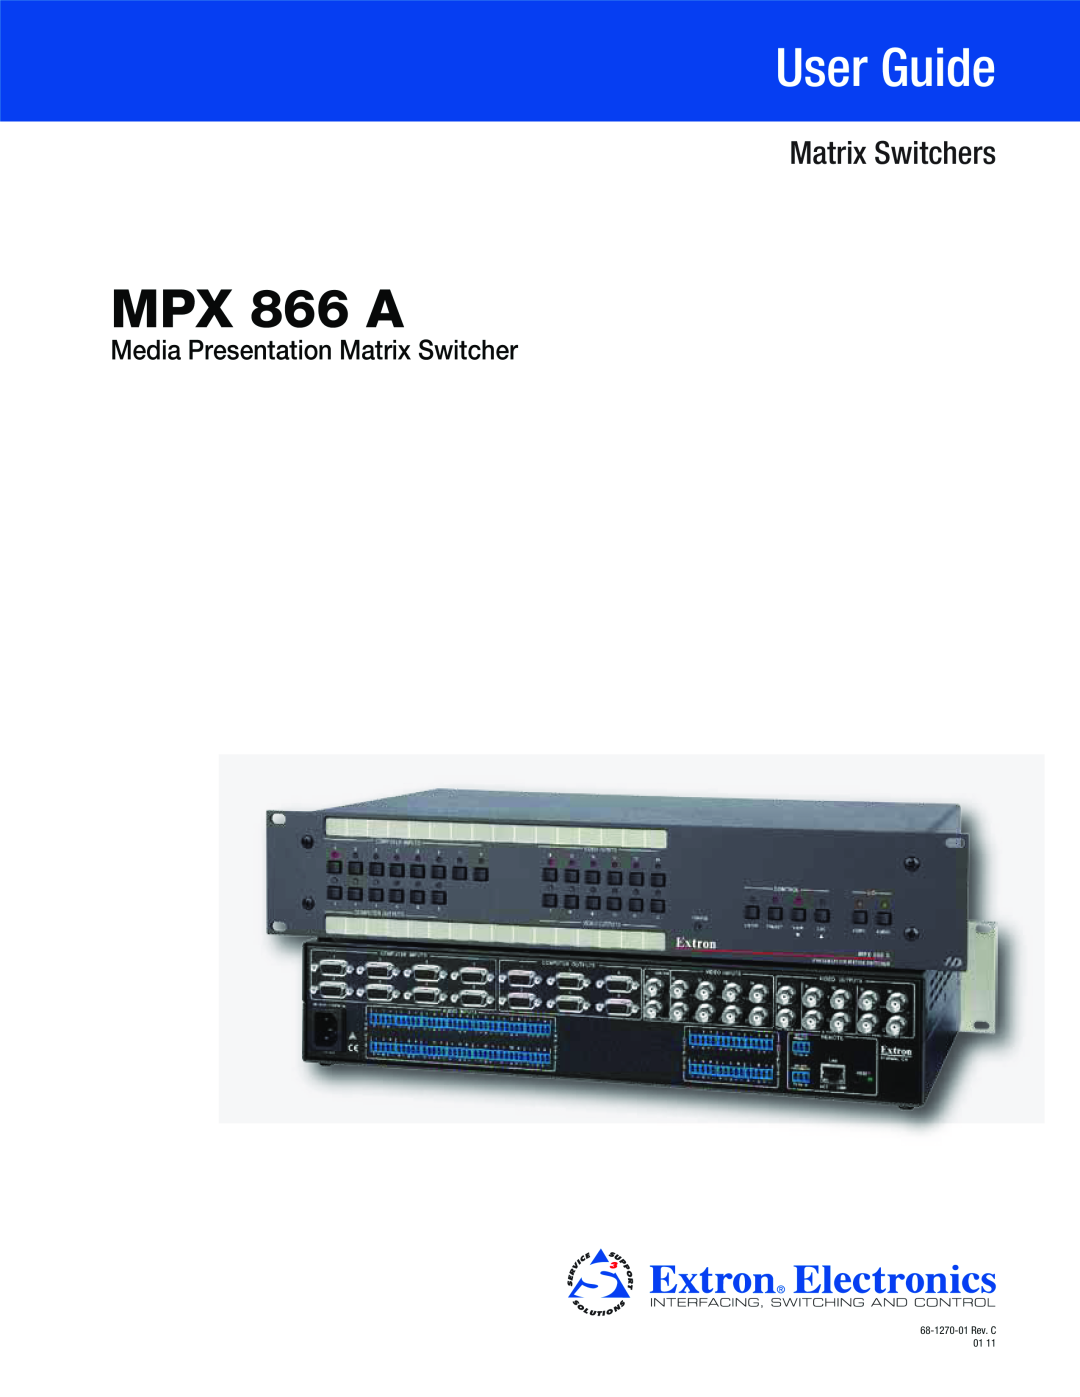 Extron electronic specifications Video input, Video output, Specifications - MPX 866 A 